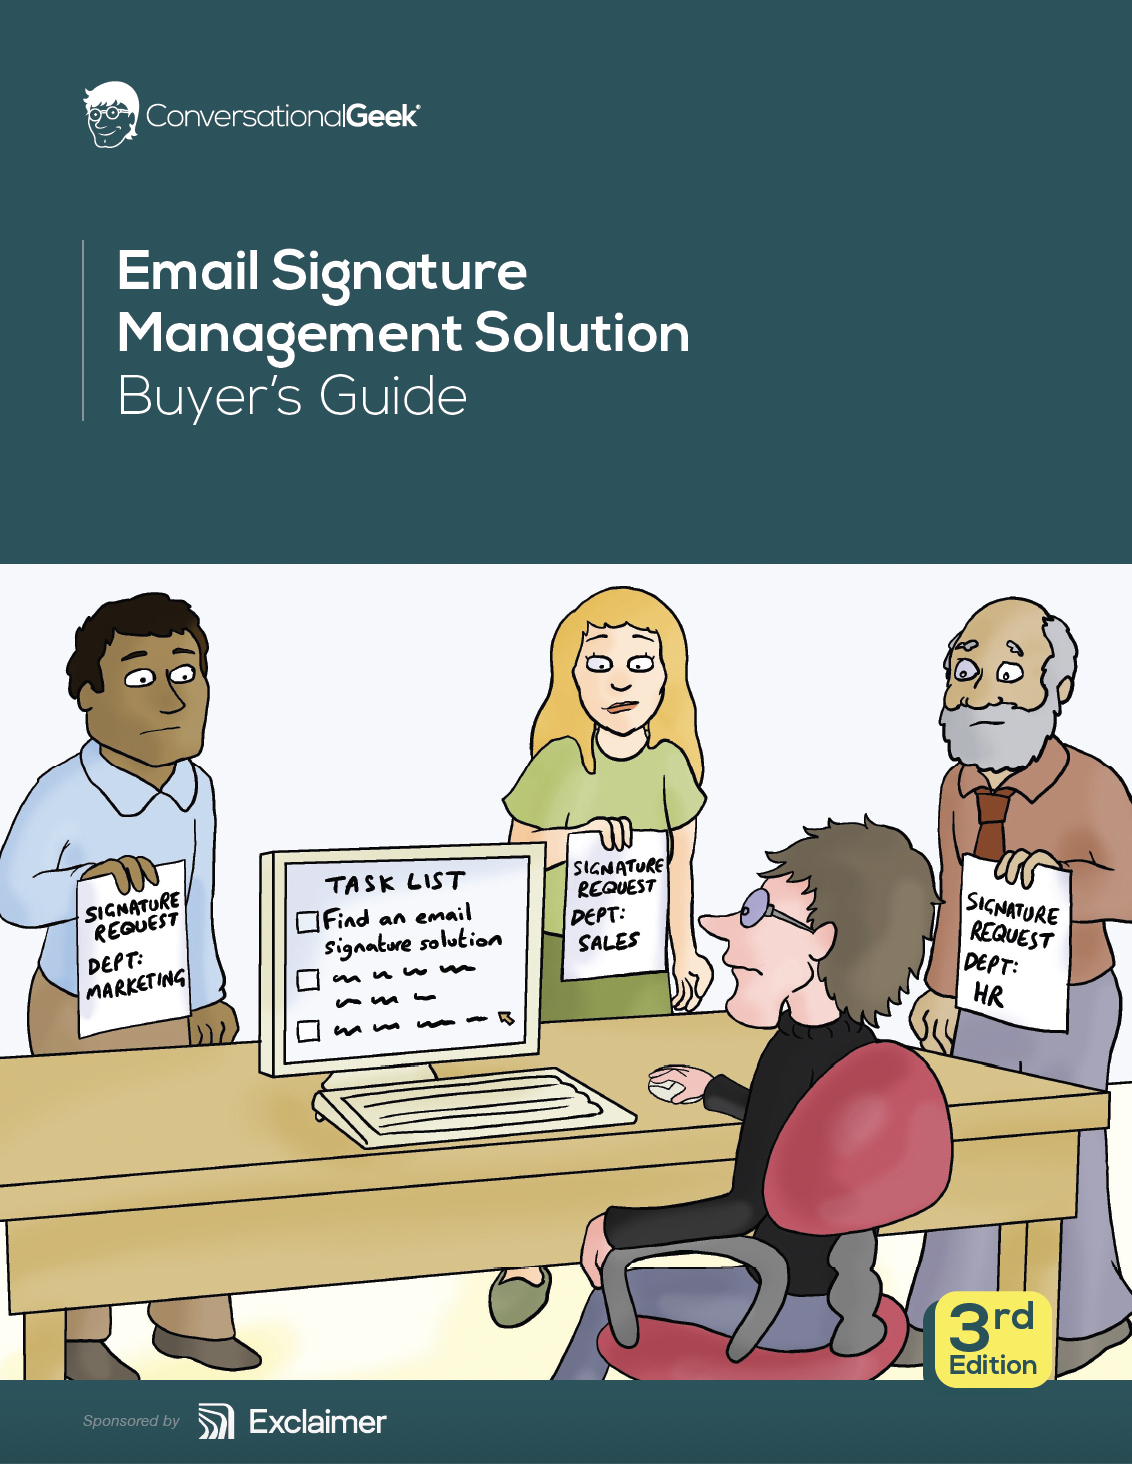 Email Signature Management Solution Buyer’s Guide – 3rd Edition